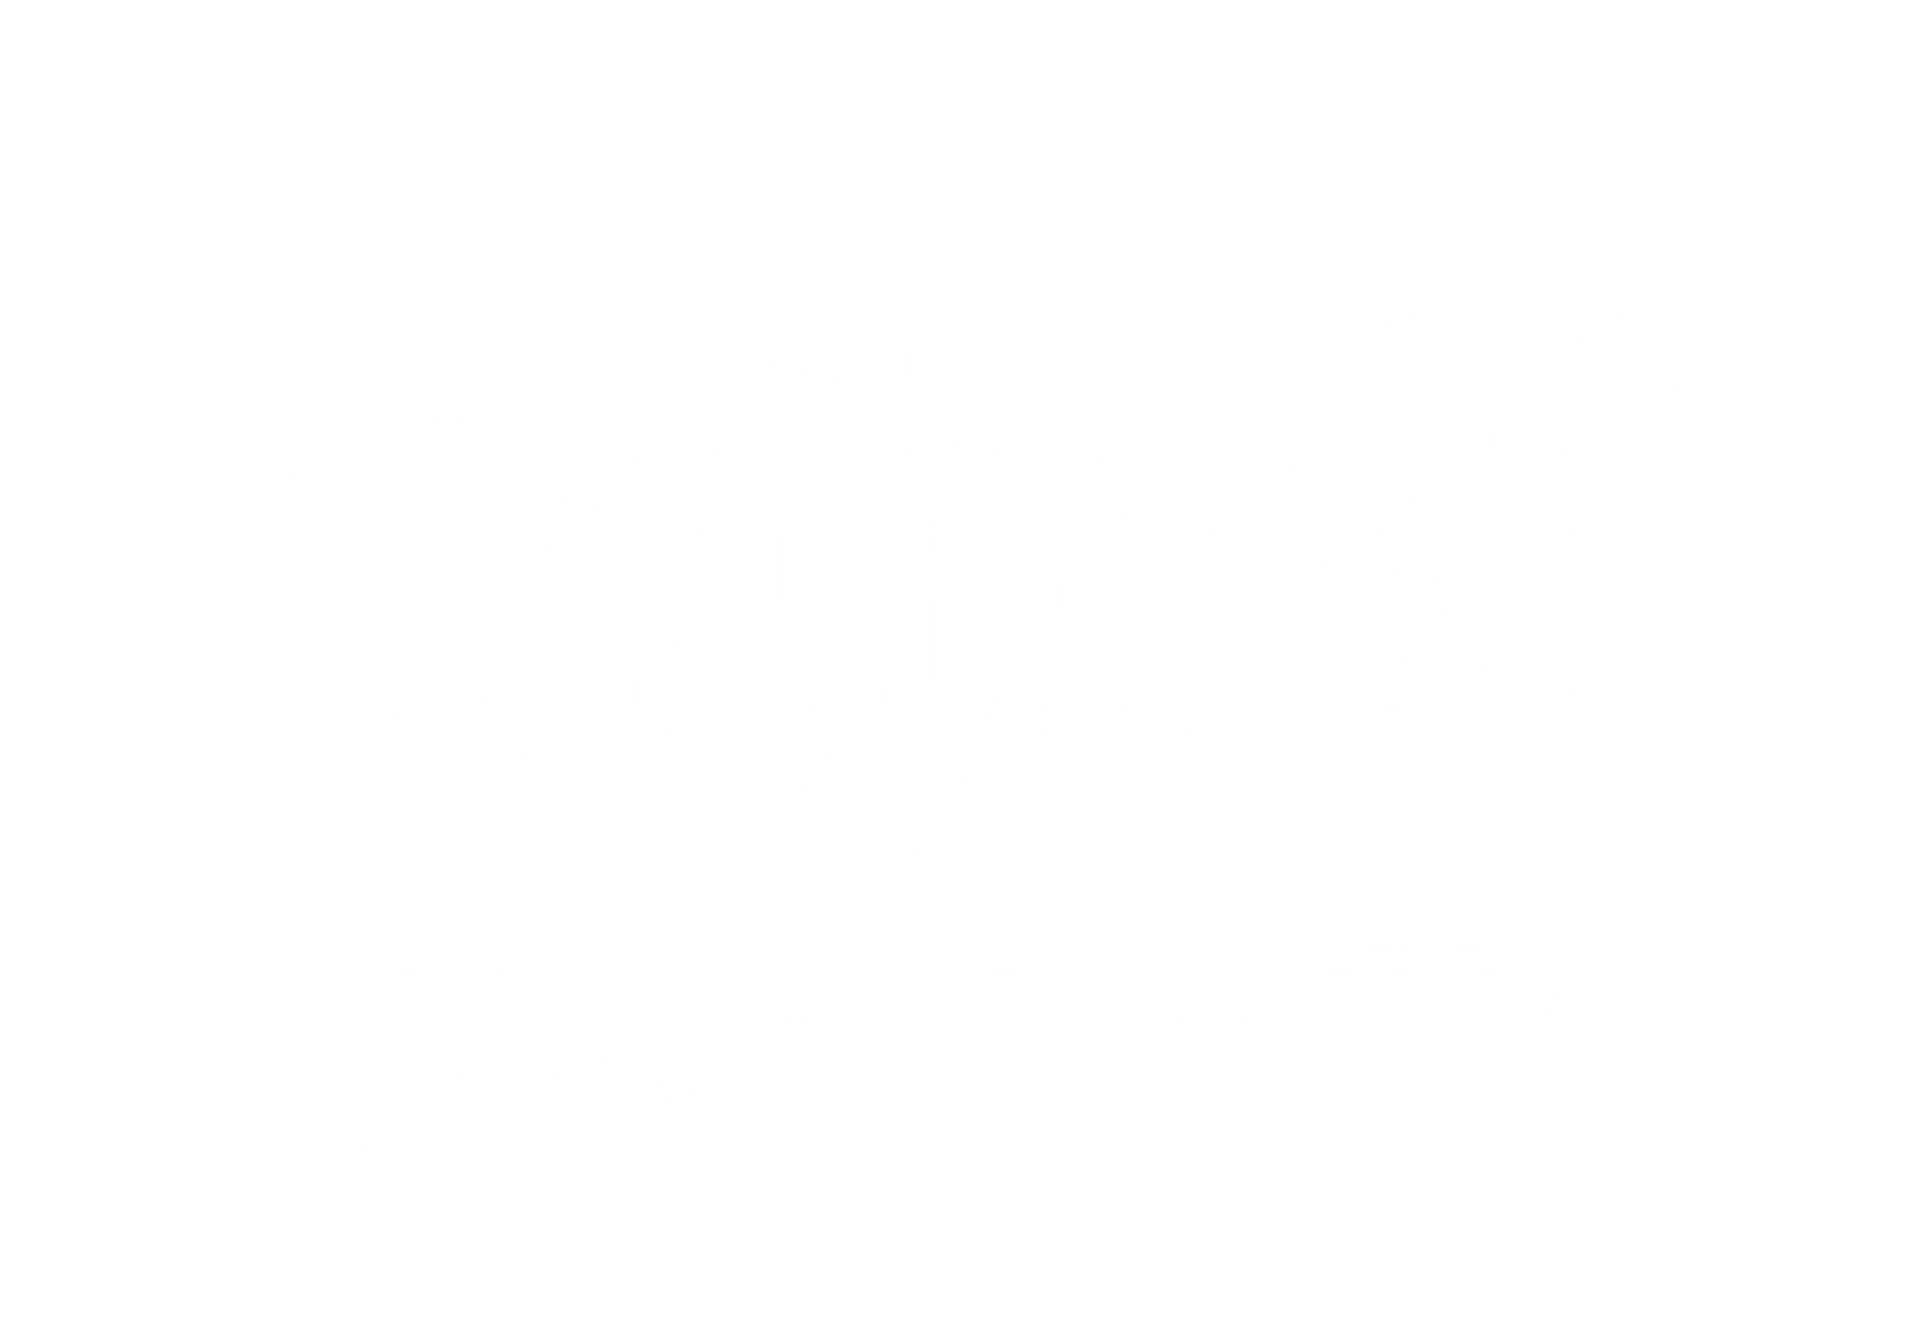 Clay Cooper's Country Express